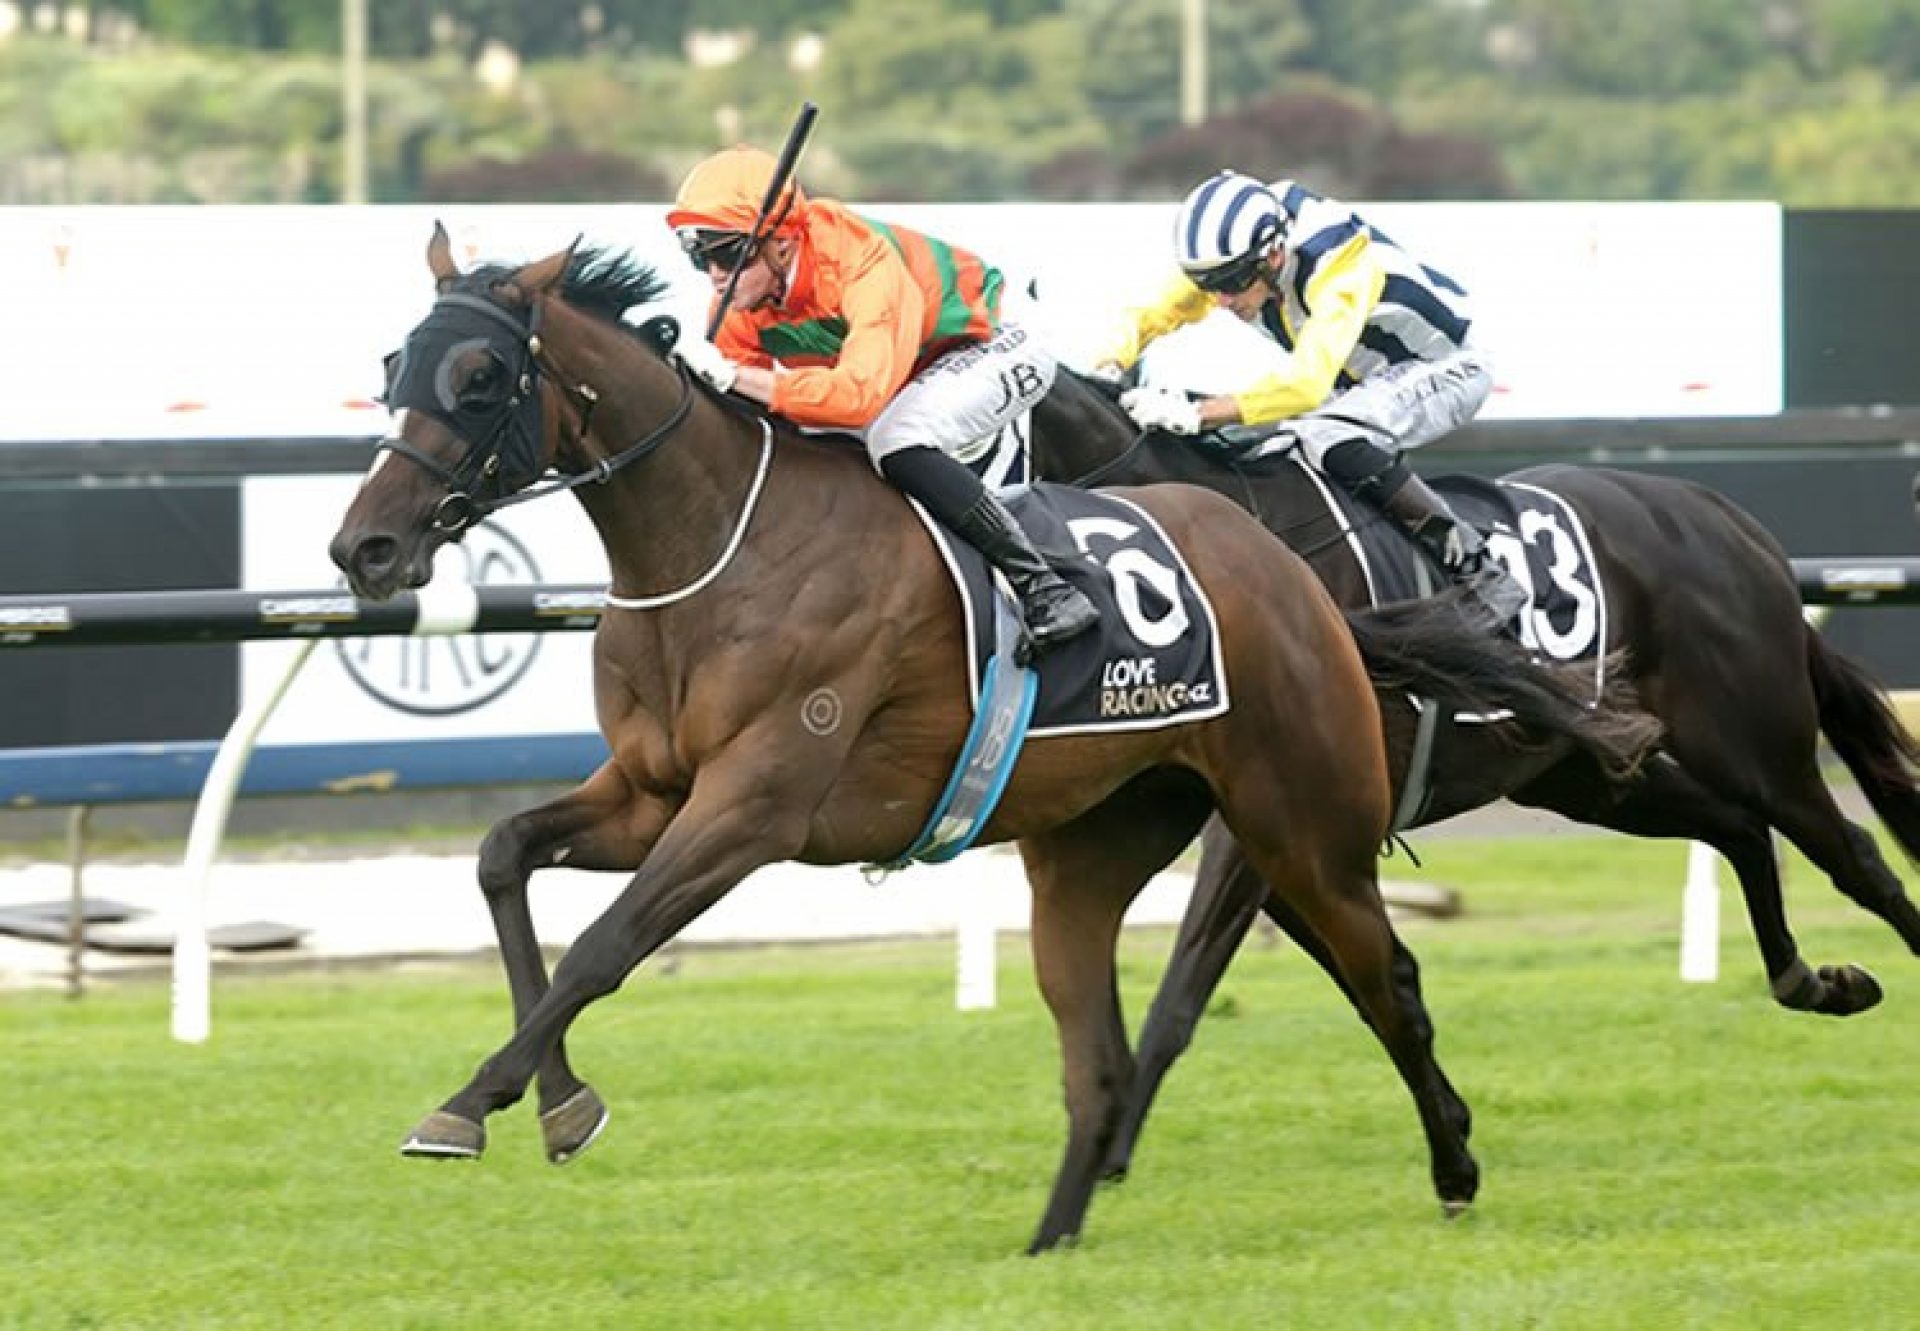 Lord Arthur (Camelot) winning the G2 Valachi Downs Championship Stakes at Ellerslie